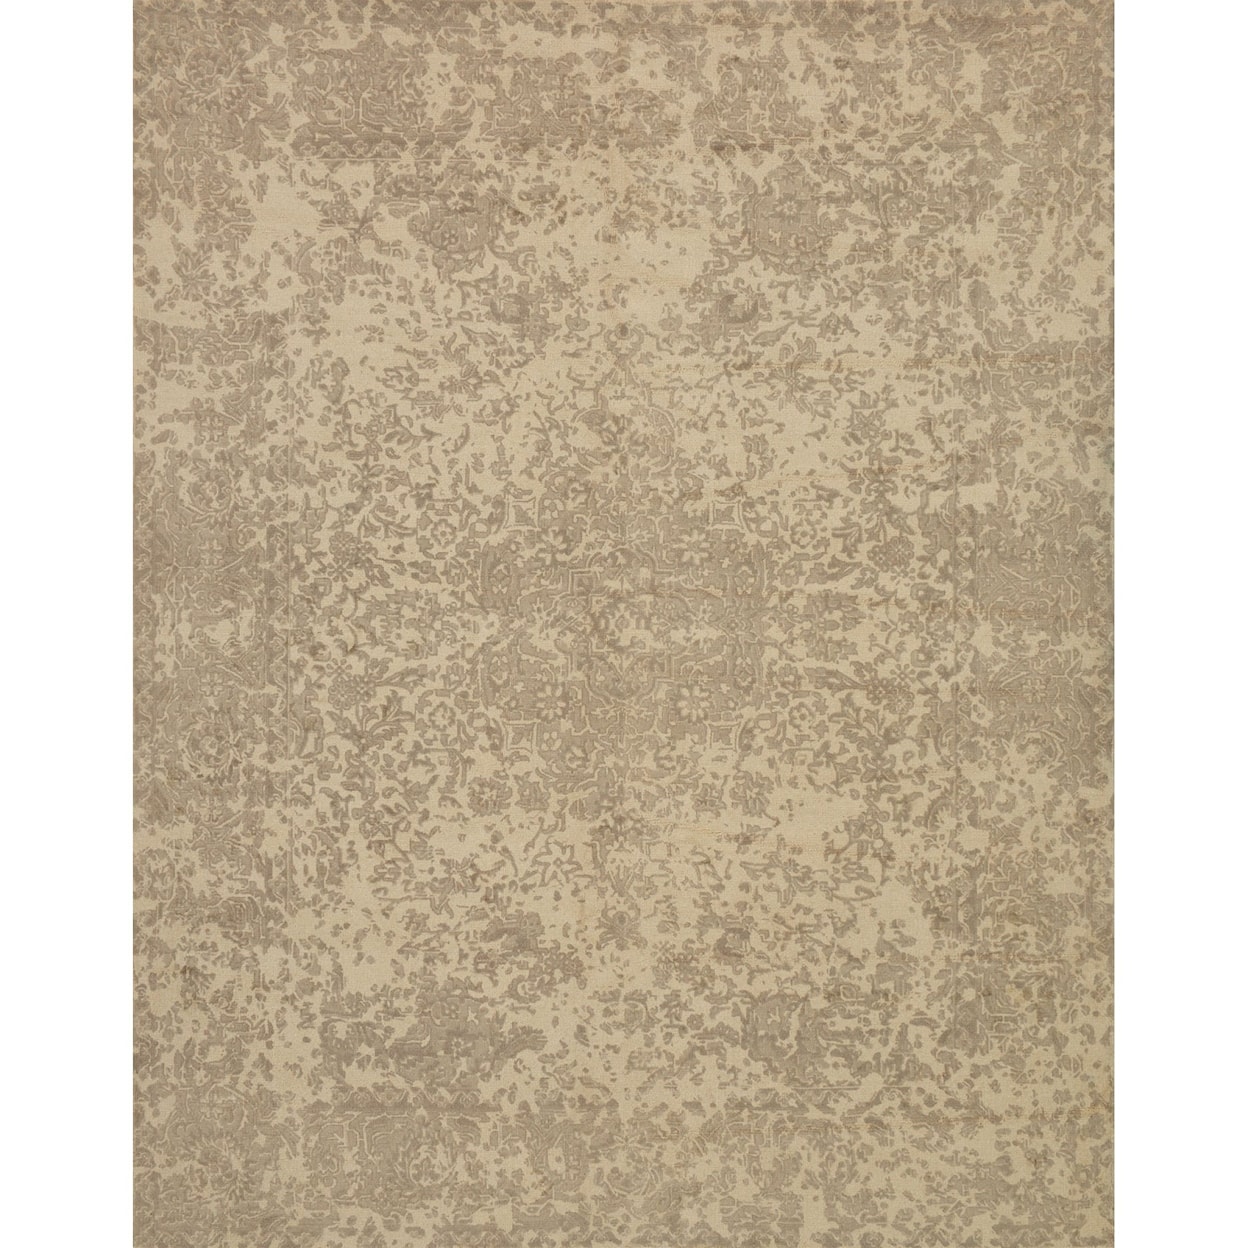 Magnolia Home by Joanna Gaines for Loloi Lily Park 3' 6" x 5' 6" Rectangle Rug